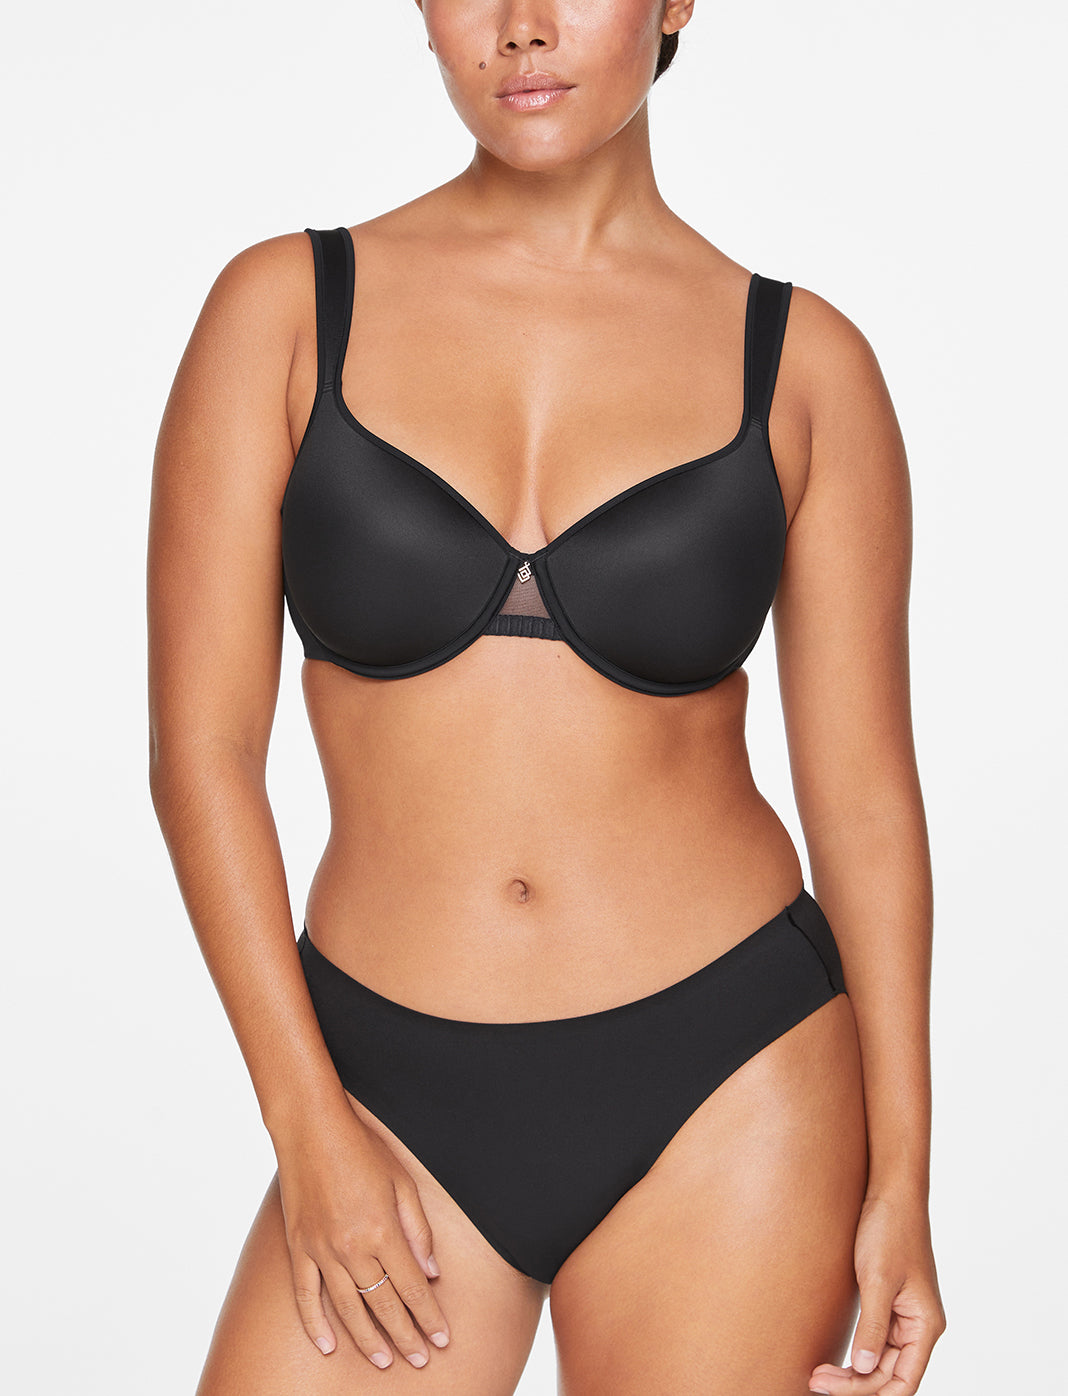 Your bra shopping guide: 11 styles for everyday to strapless and bralette -  Good Morning America